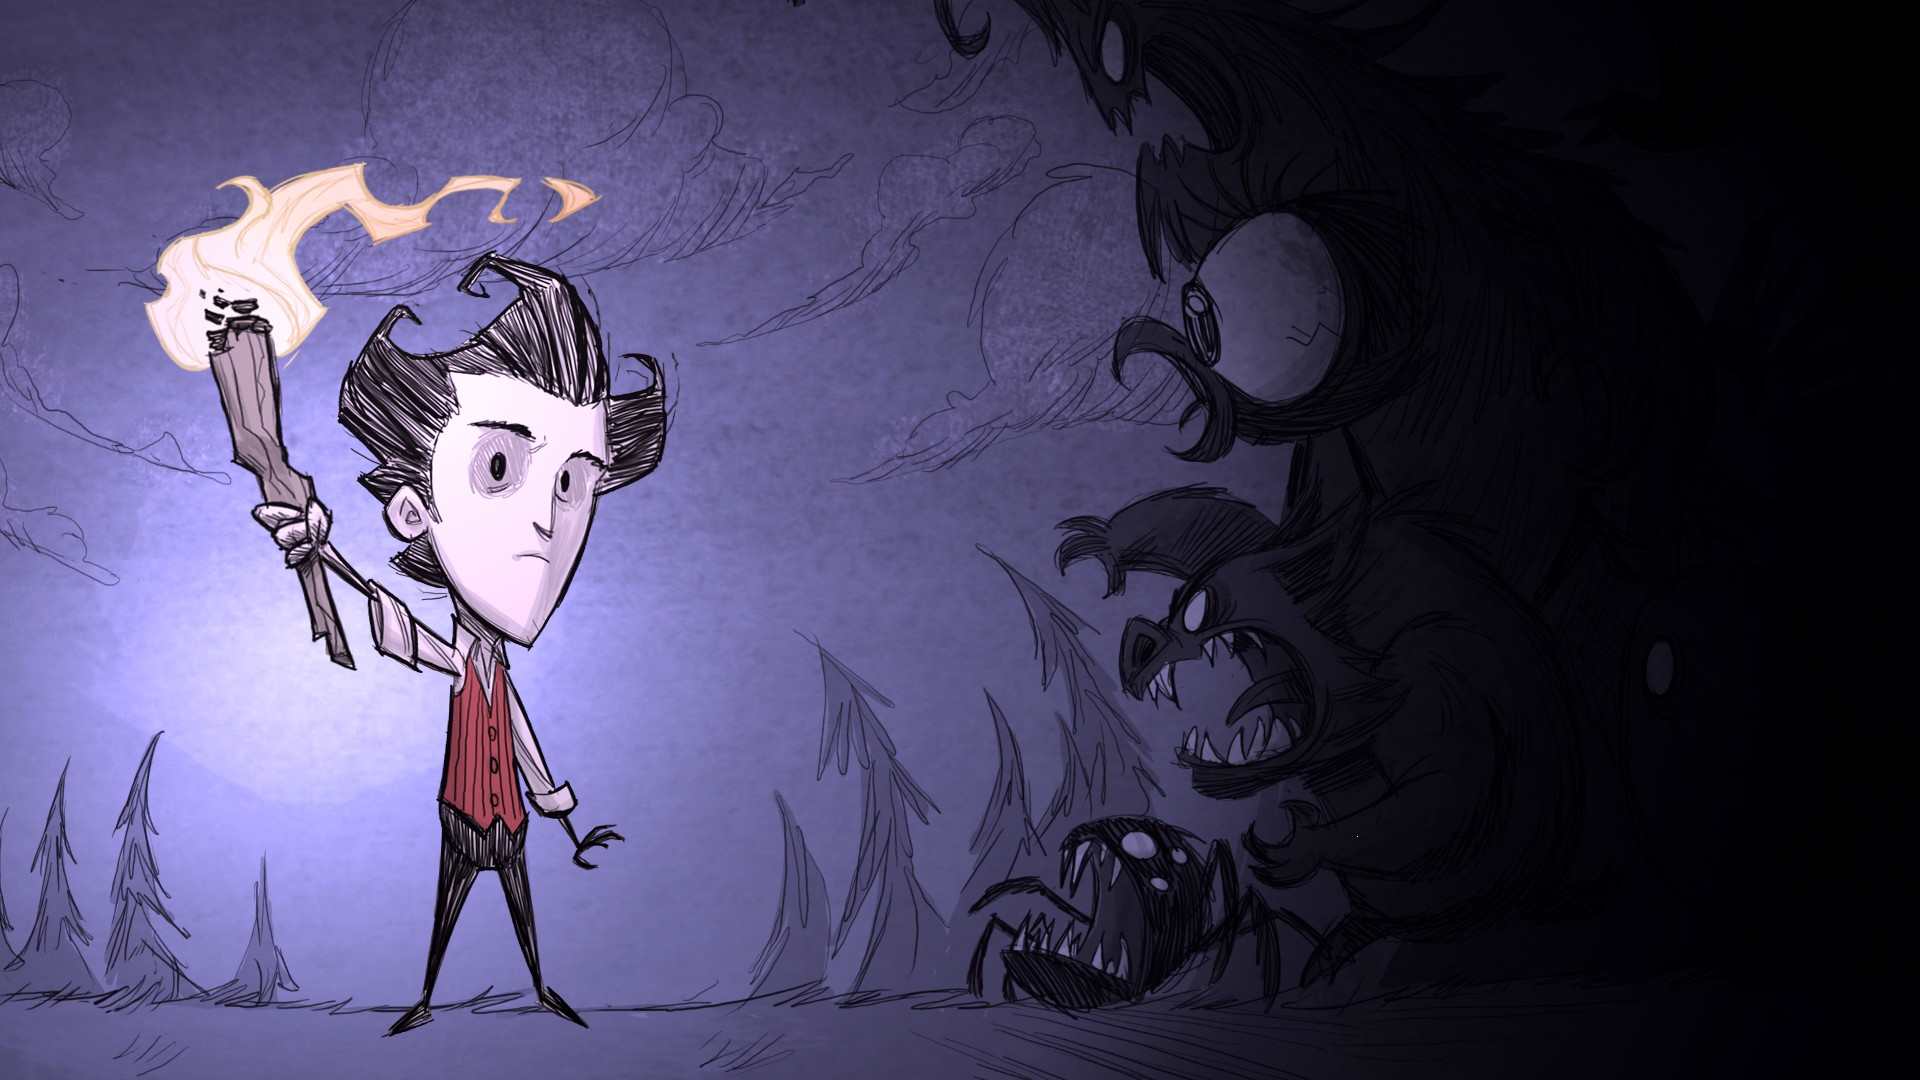 Dont 7. Don't Starve together фон. Уилсон don't Starve. ДСТ игра.